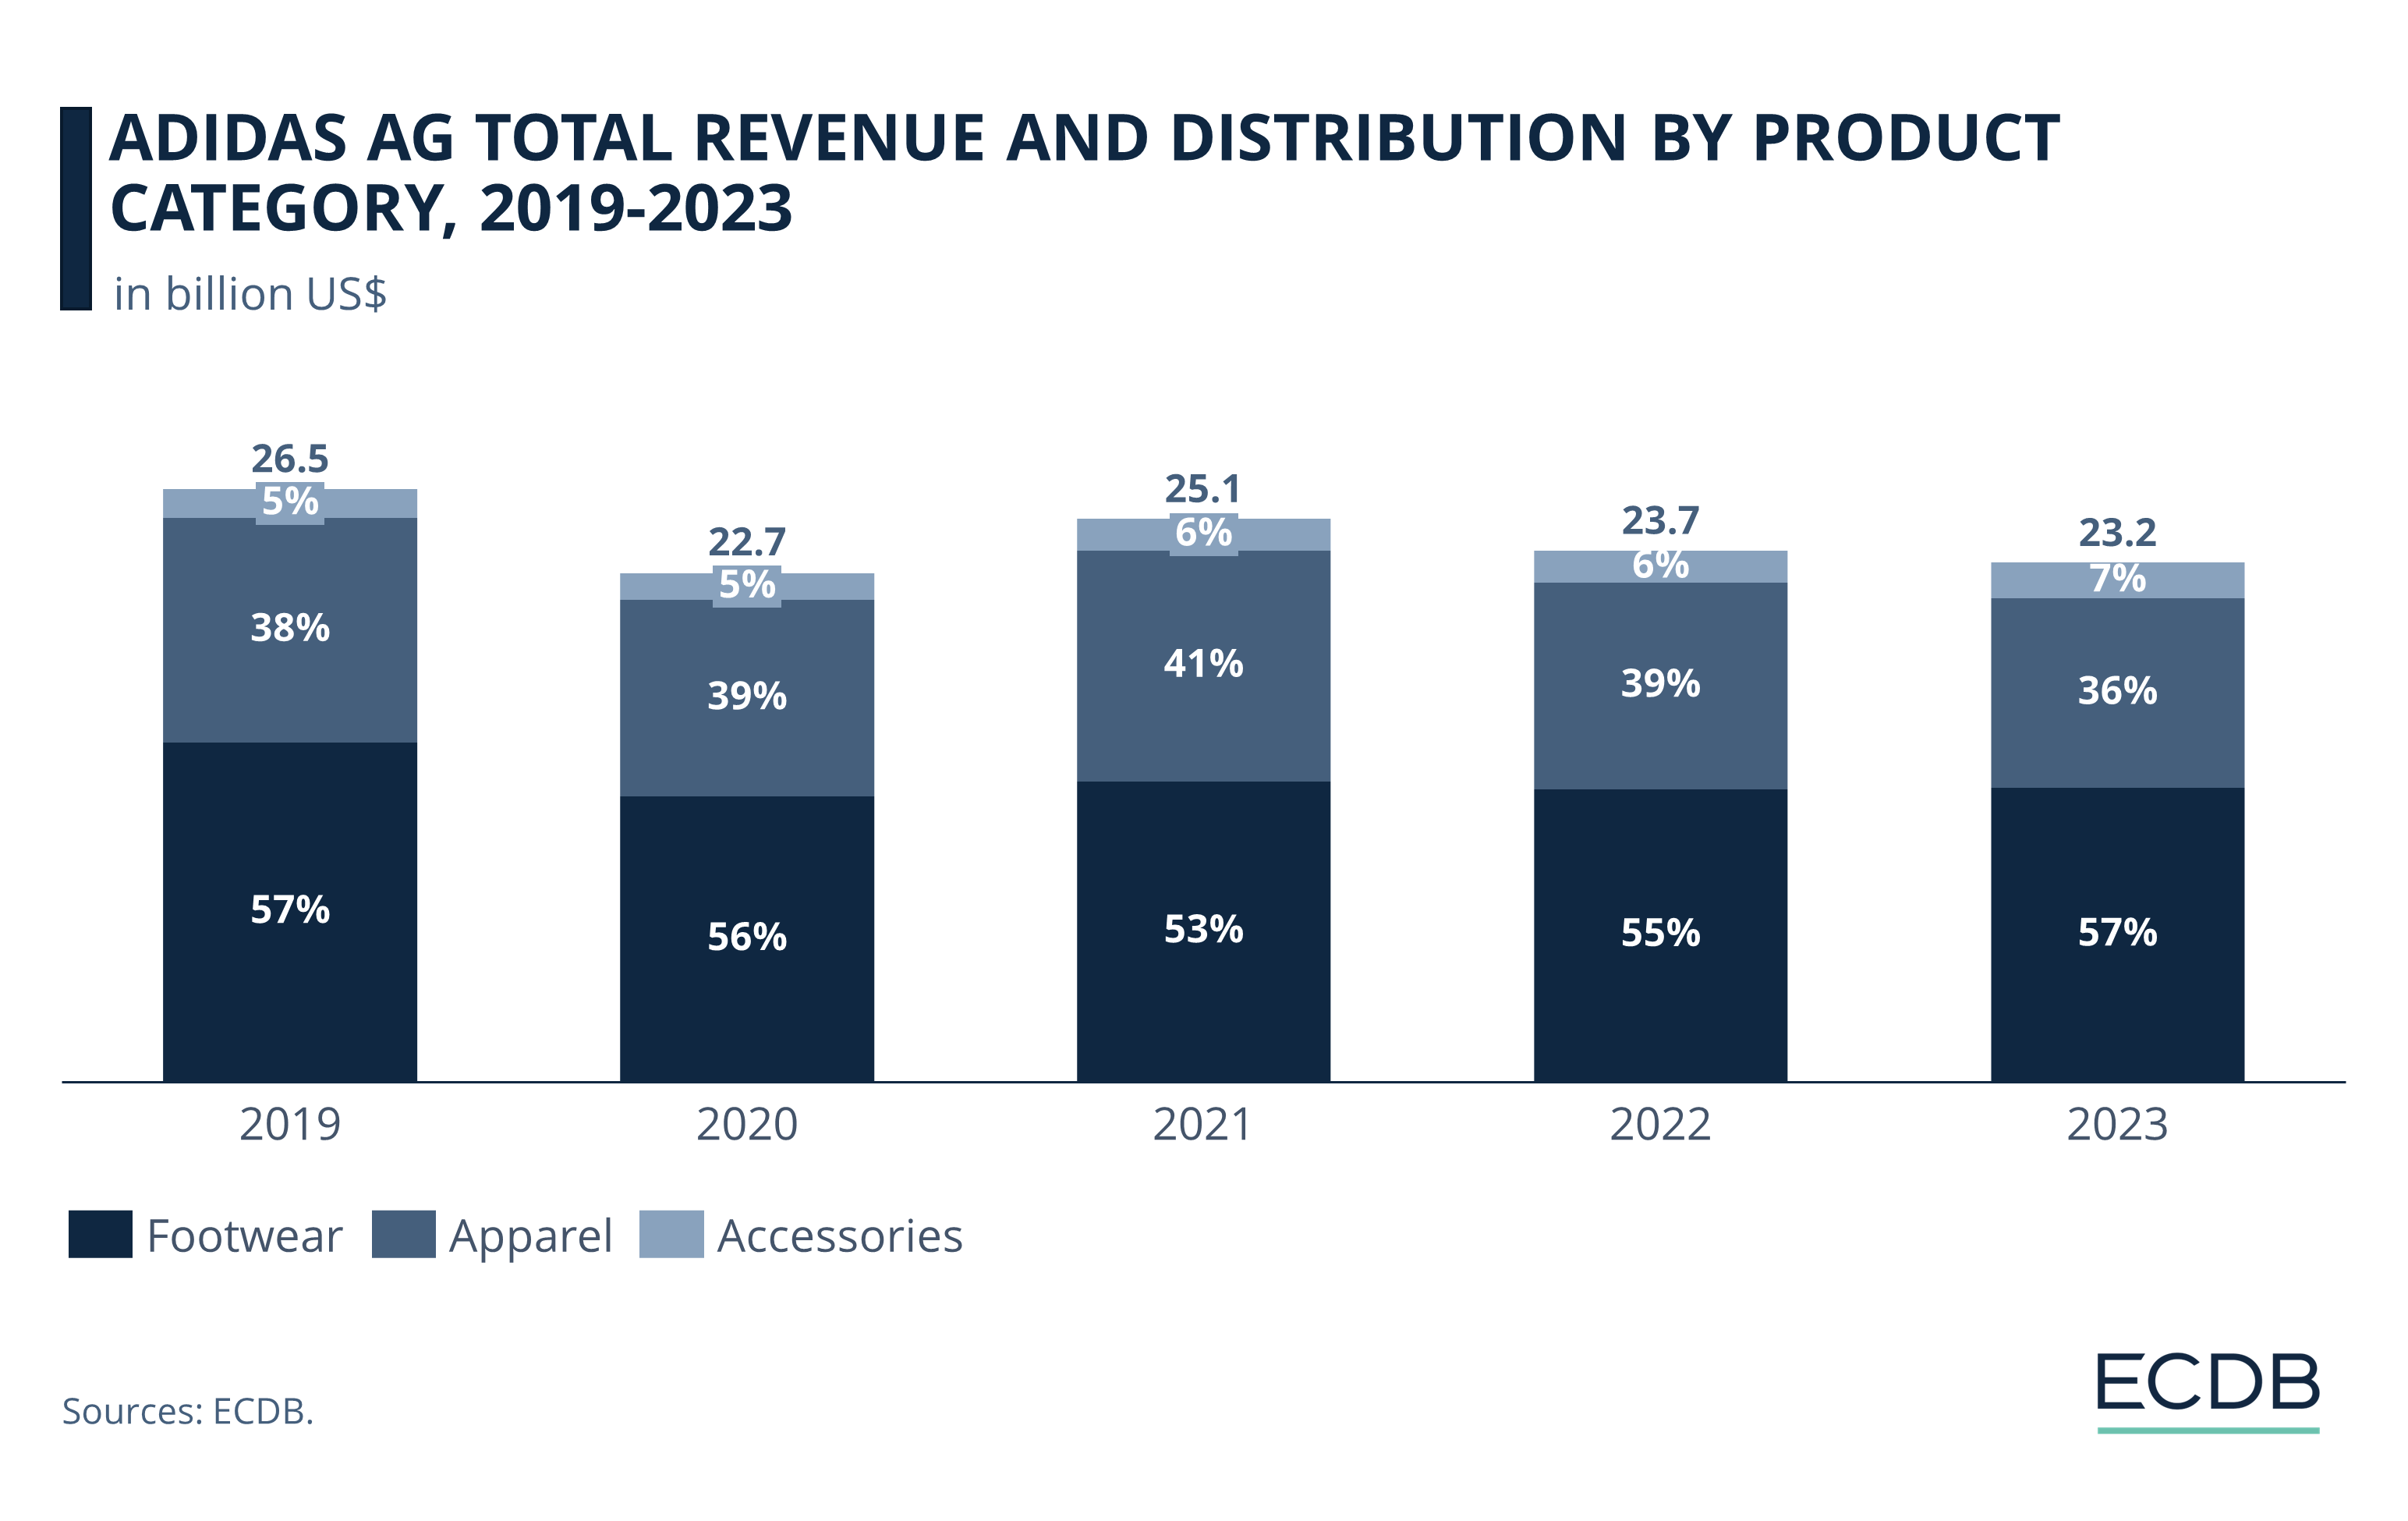 Adidas AG Total Revenue and Distribution by Product Category, 2019-2023